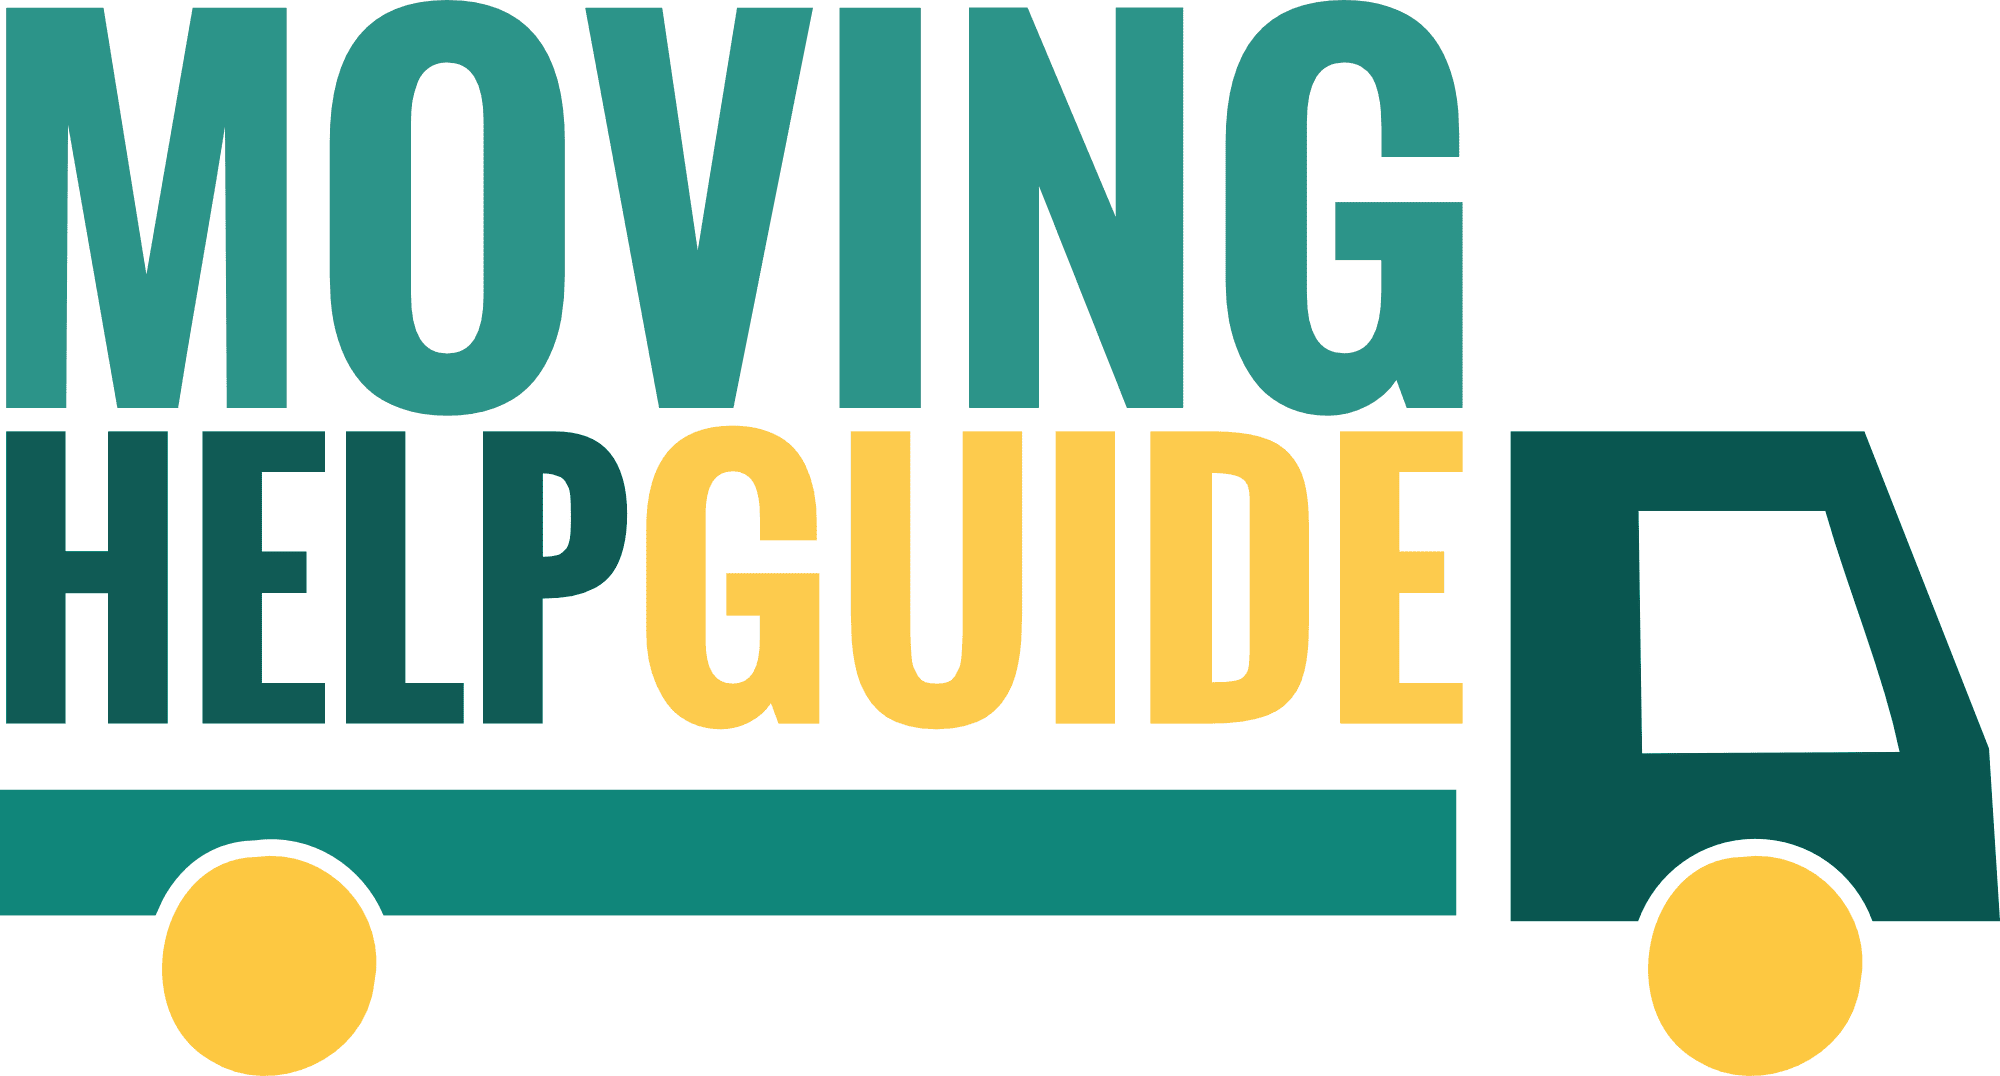 https://www.movinghelpguide.com/wp-content/uploads/2016/09/Moving-Help-Guide-1.png